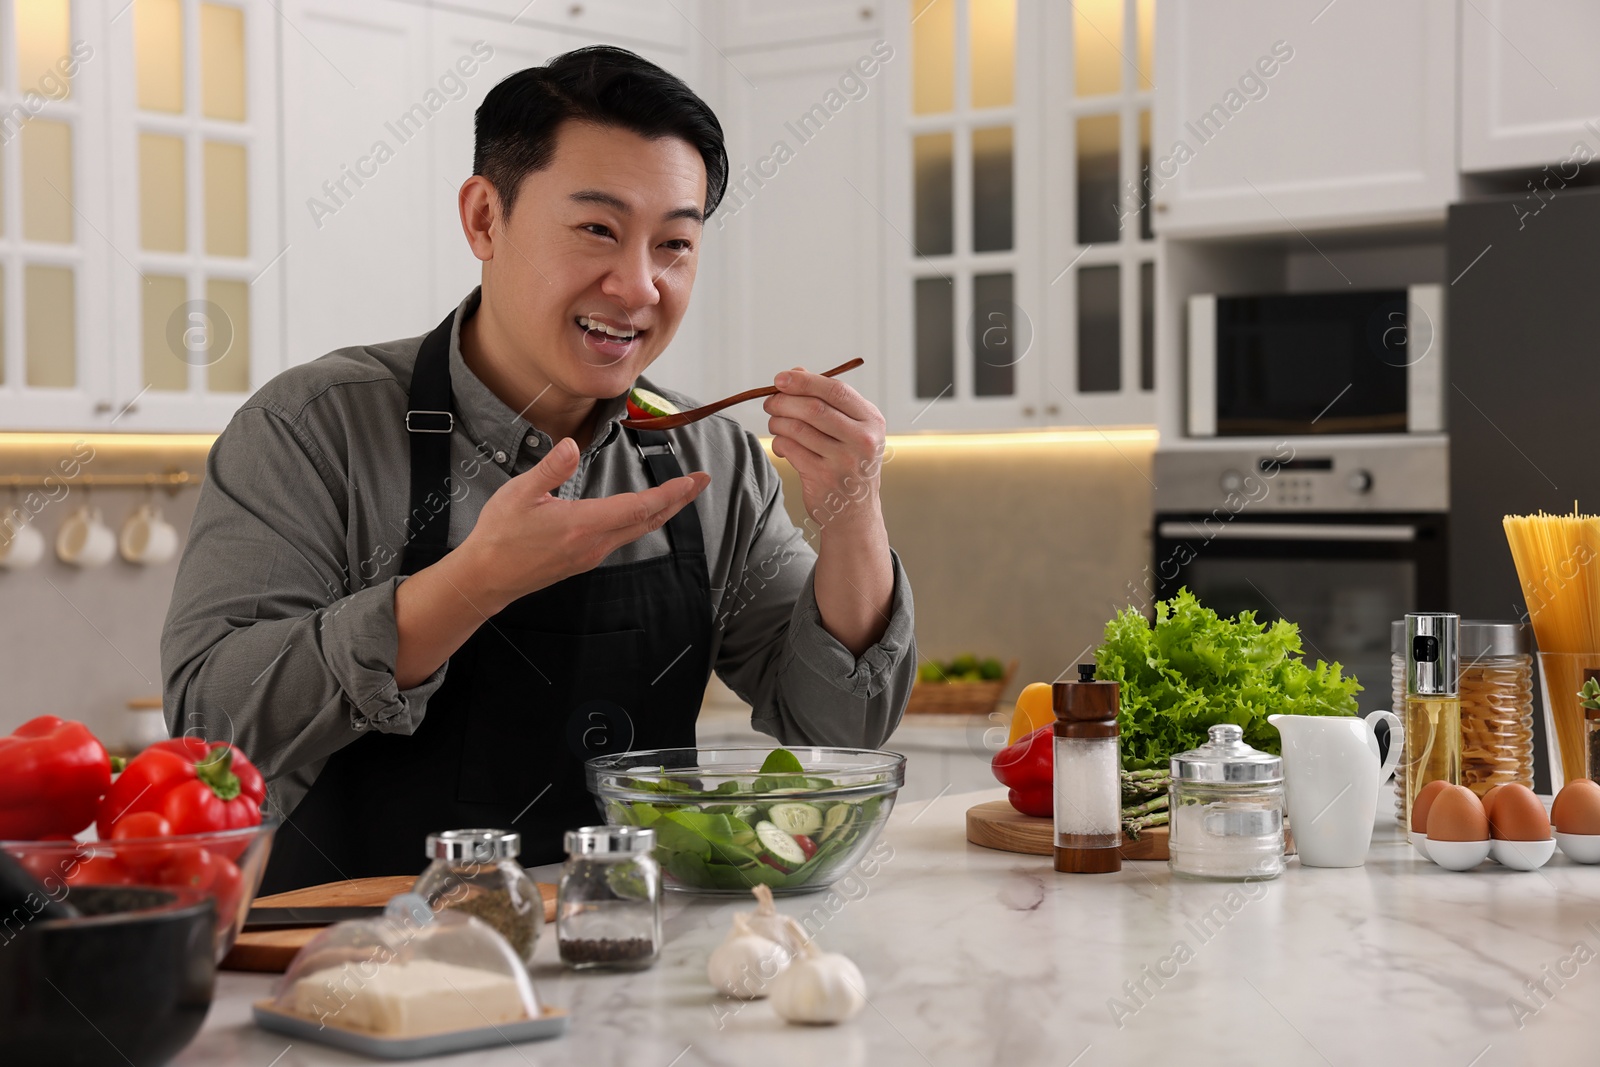 Photo of Cooking process. Man tasting salad in kitchen